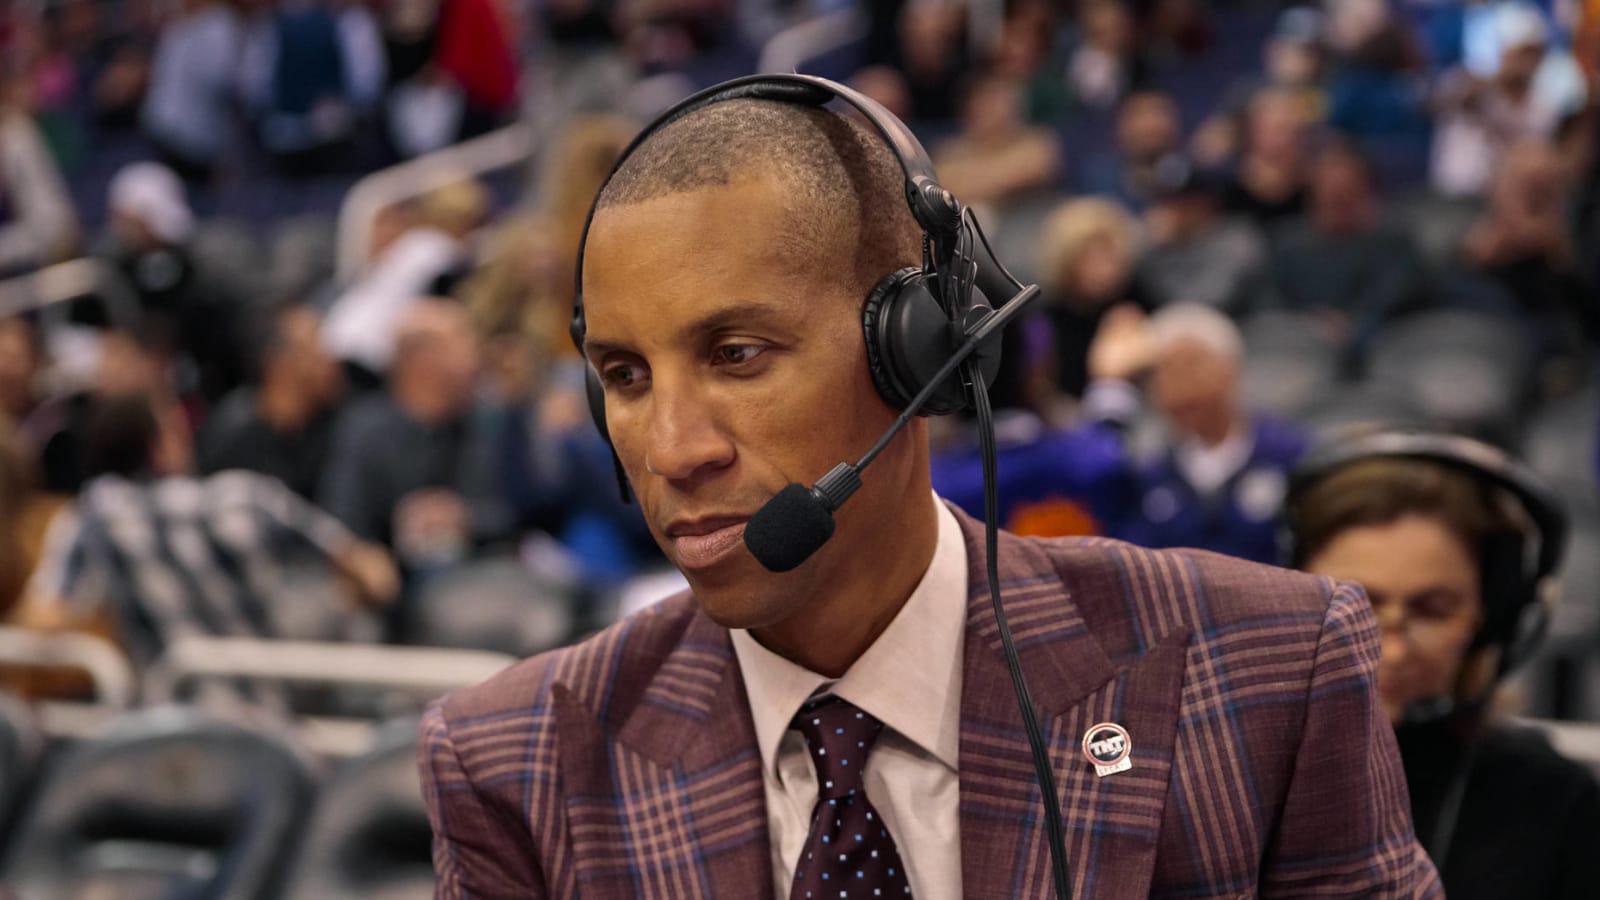 Reggie Miller never had interest in teaming up with MJ